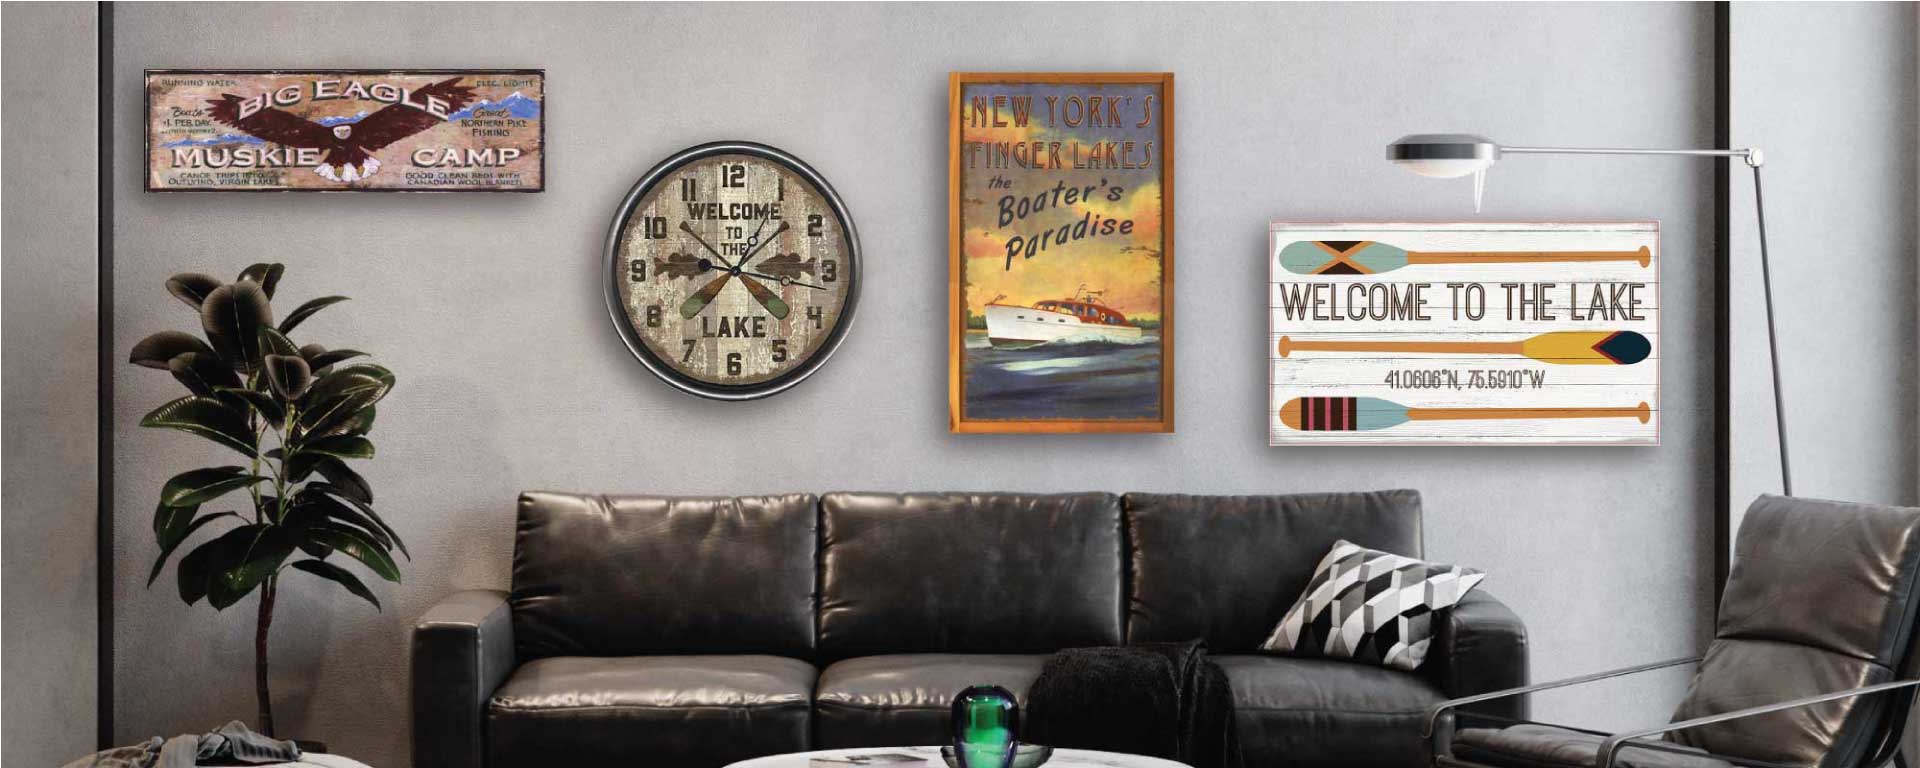 Lake house decorations; wall art for lake and mountain cabins